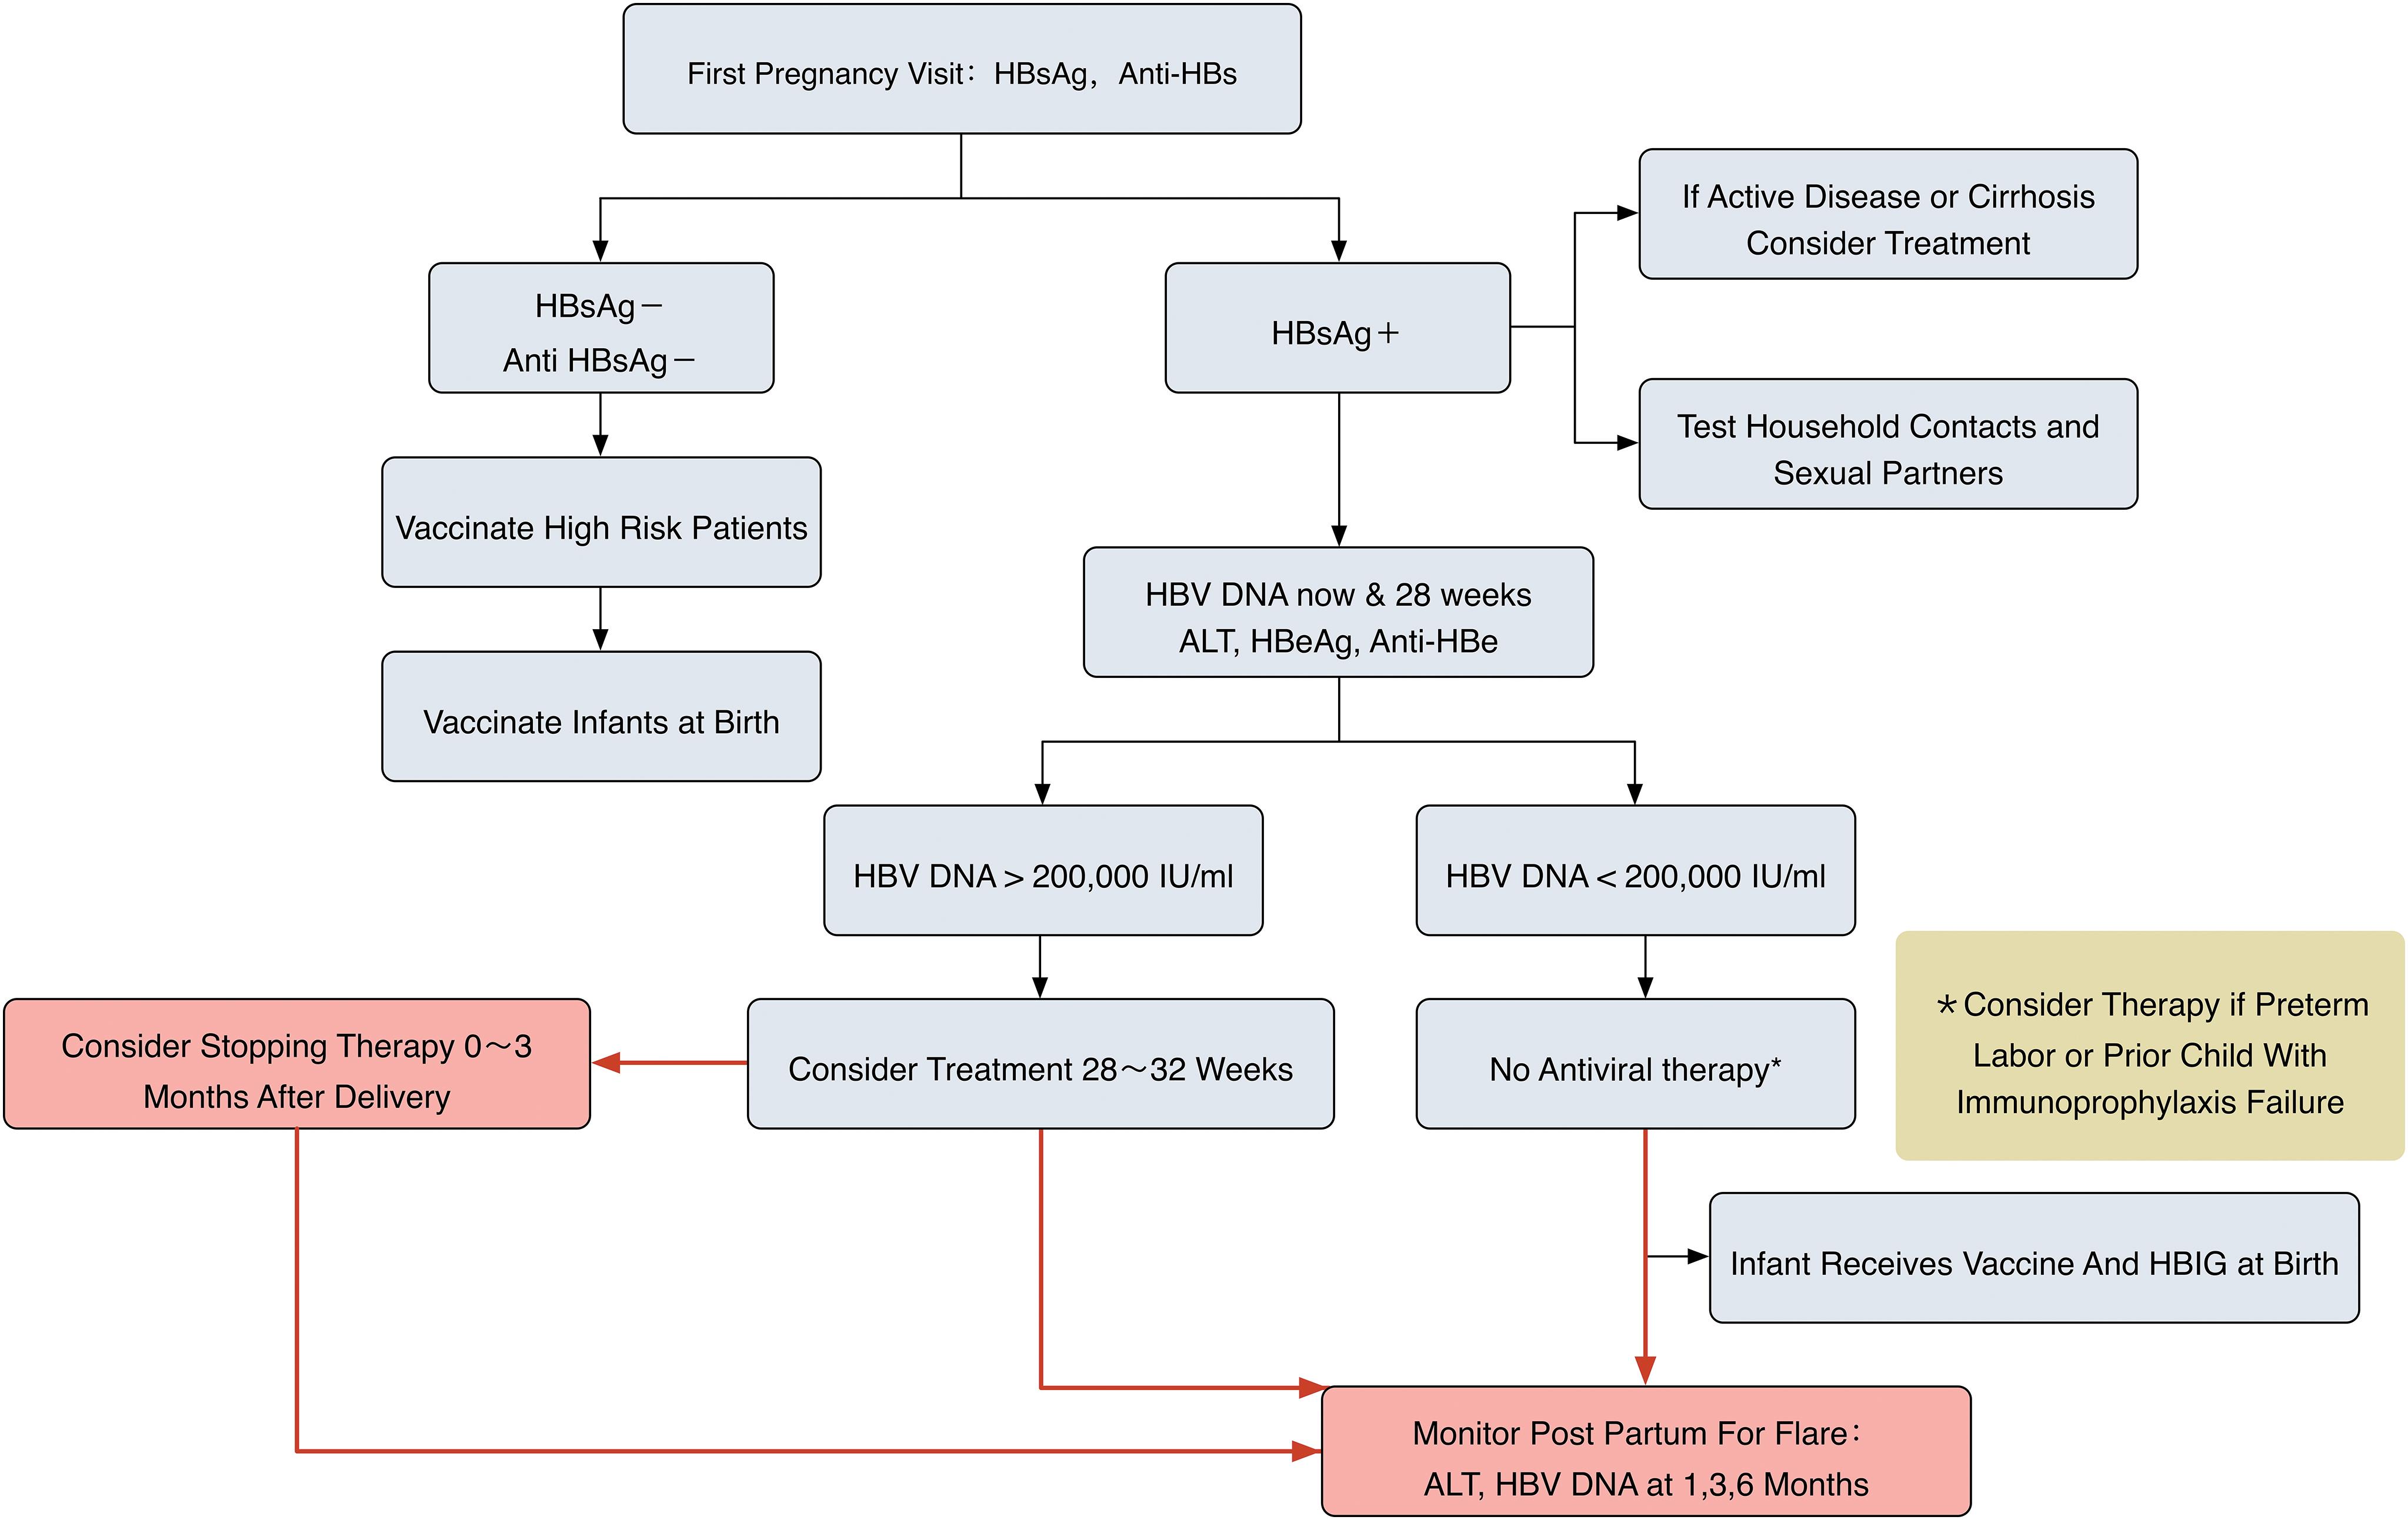 Suggested management of HBV in pregnant patients.